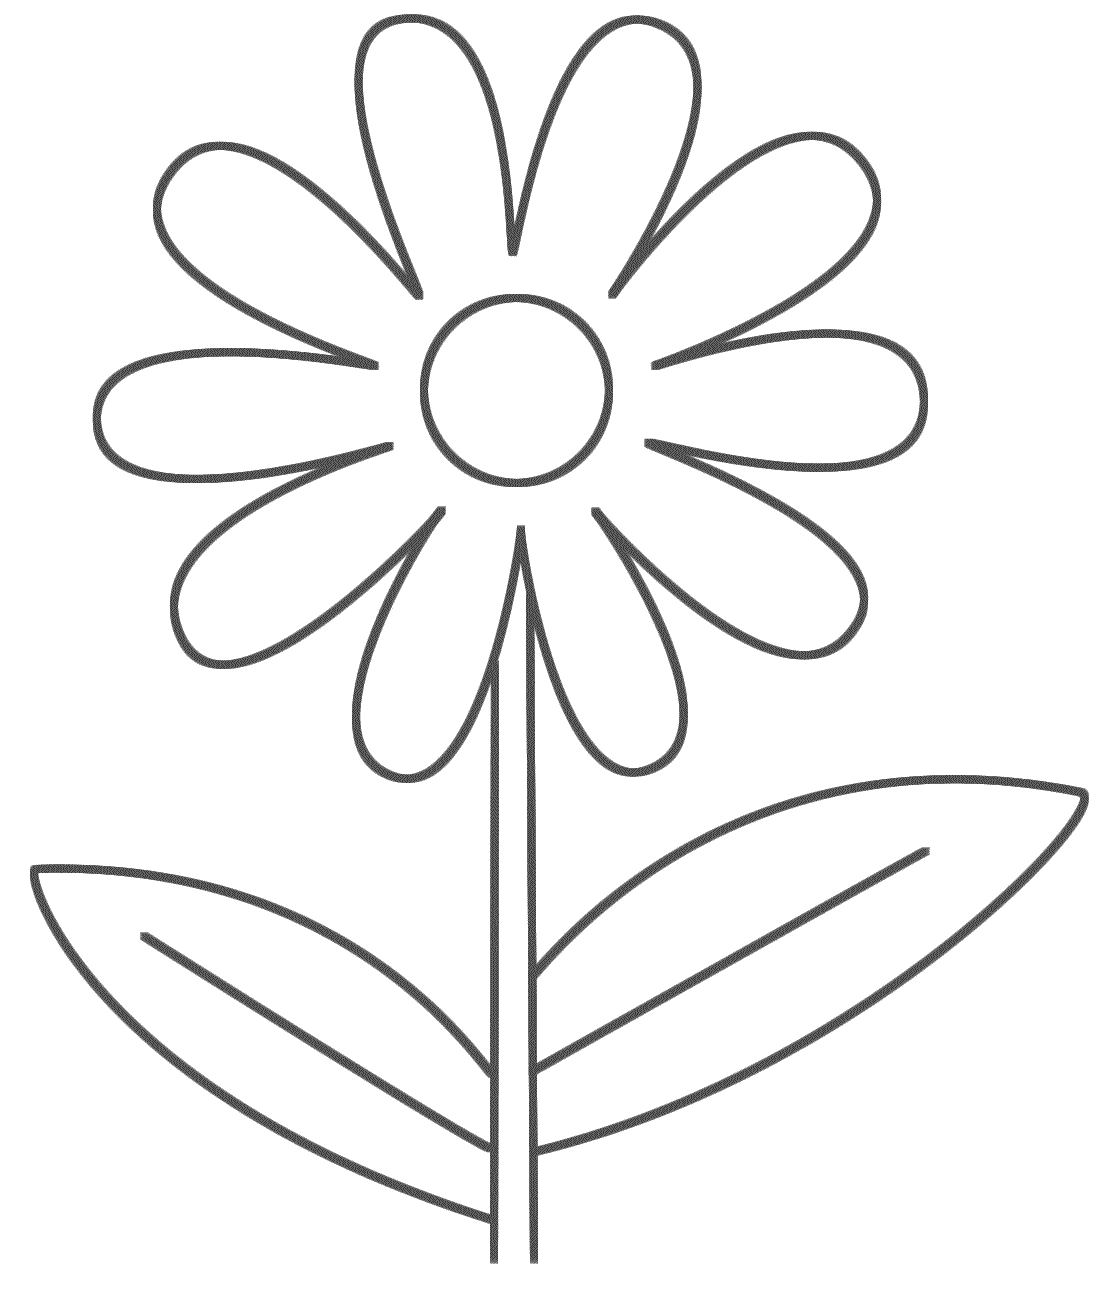 Easy Printable Flower Coloring Pages | Flower Coloring pages of ...